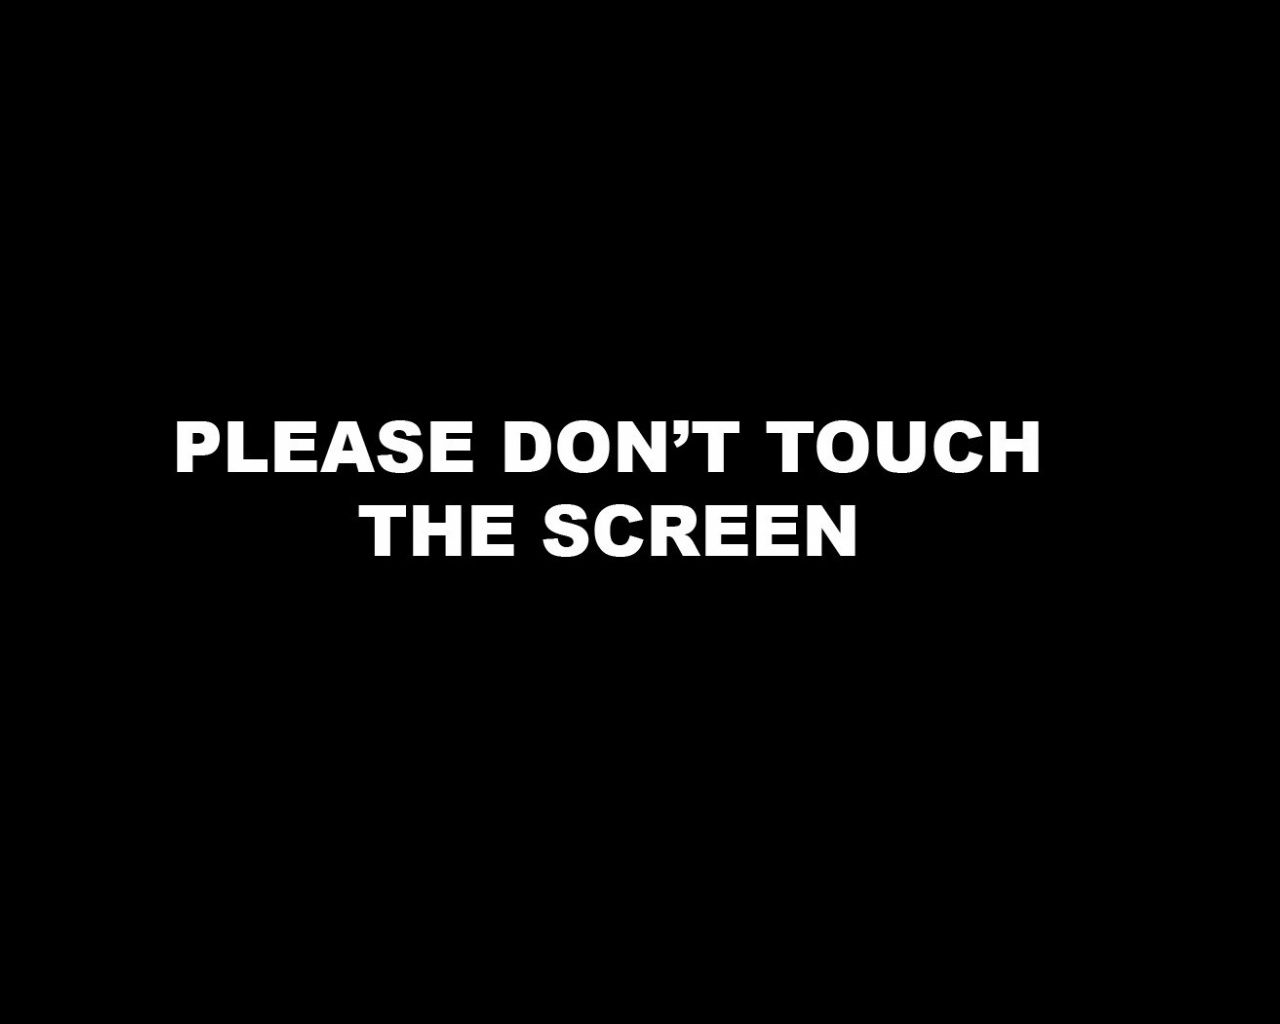 Don't touch the screen desktop PC and Mac wallpaper